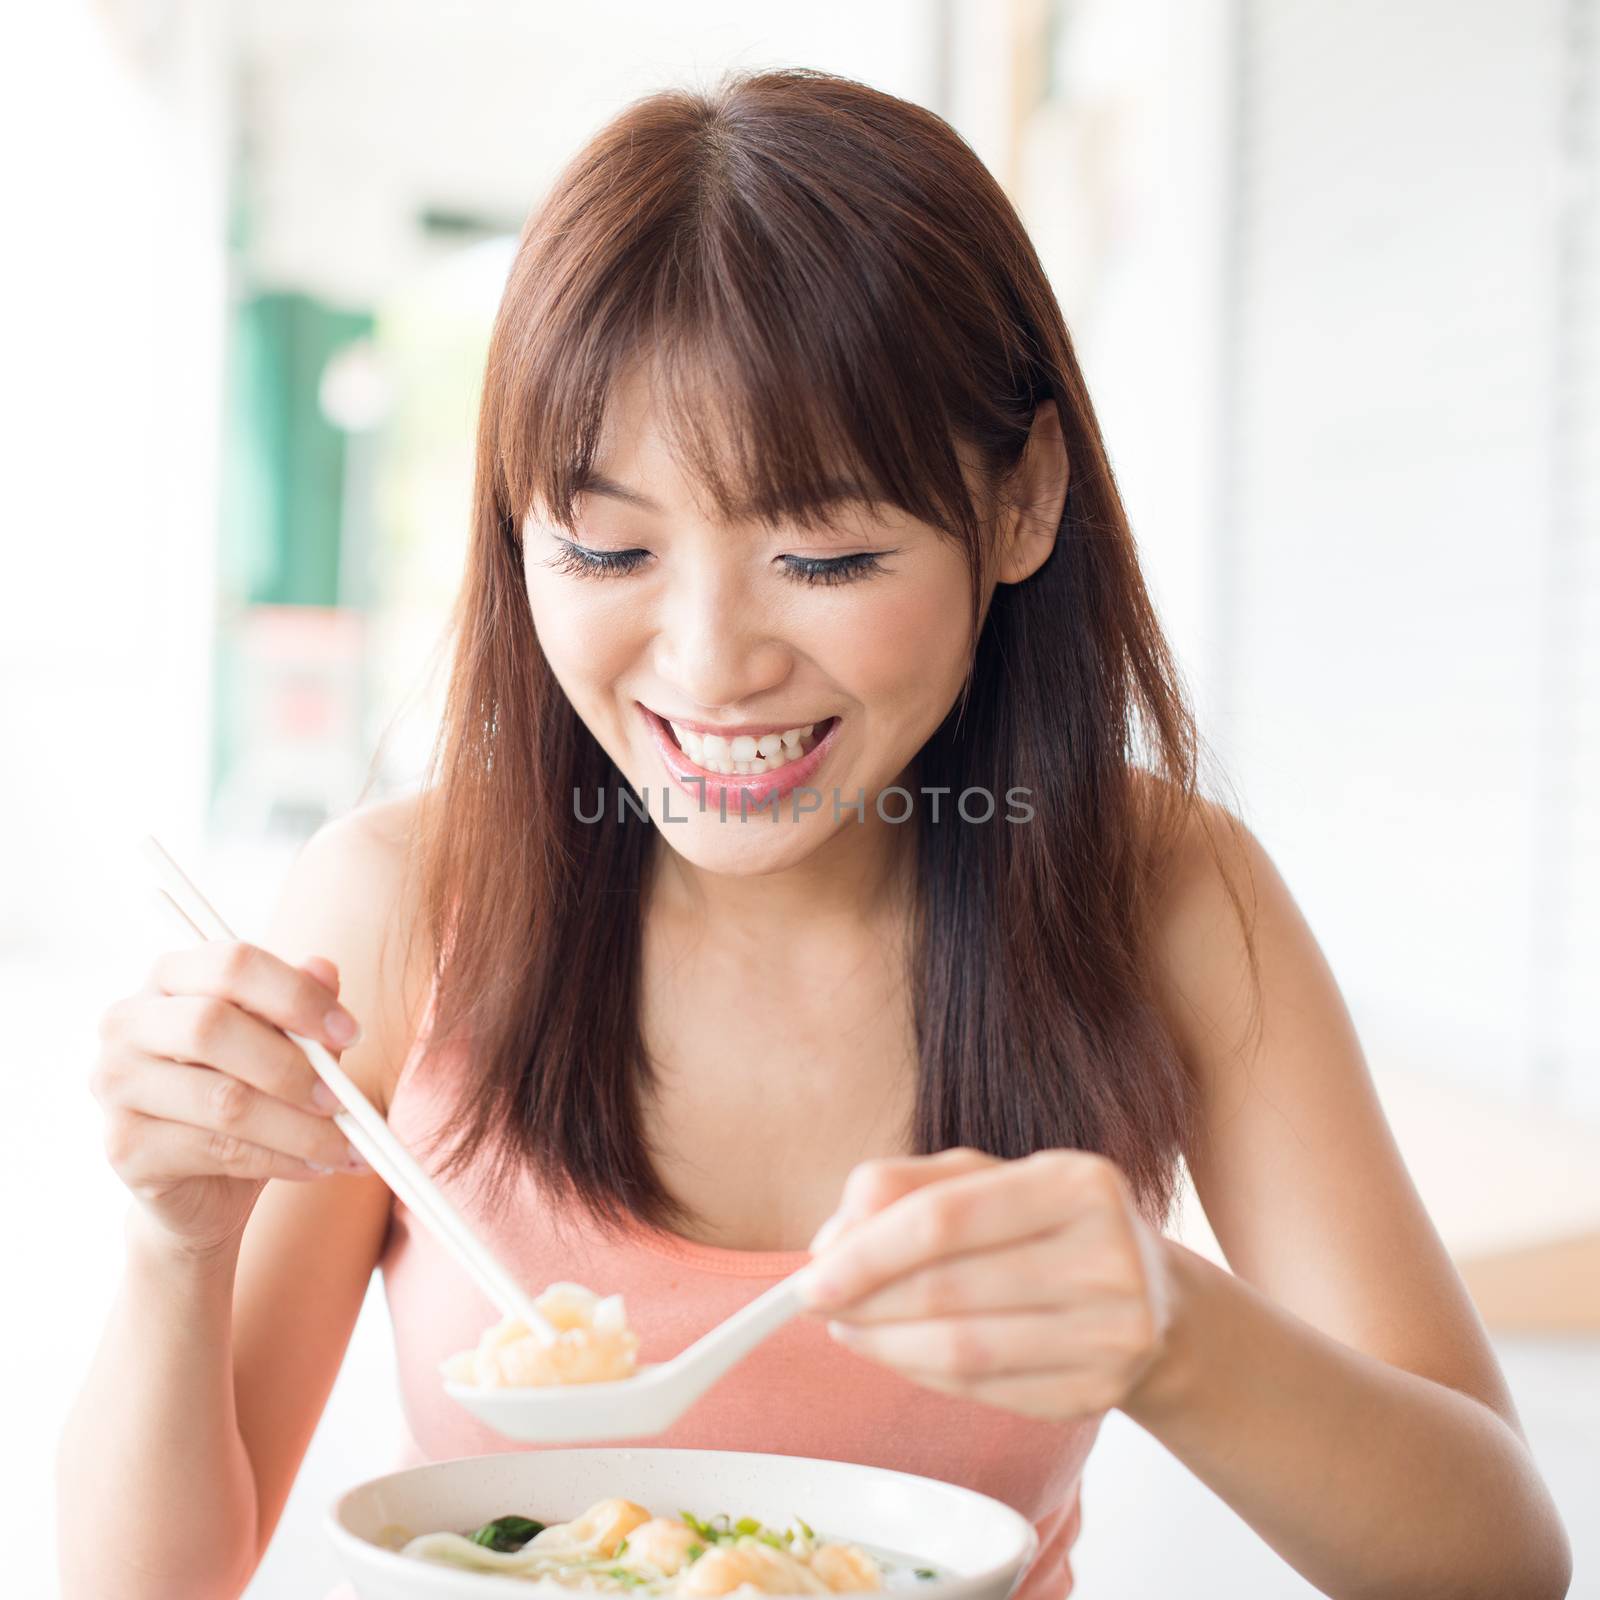 Chinese girl eating noodles by szefei